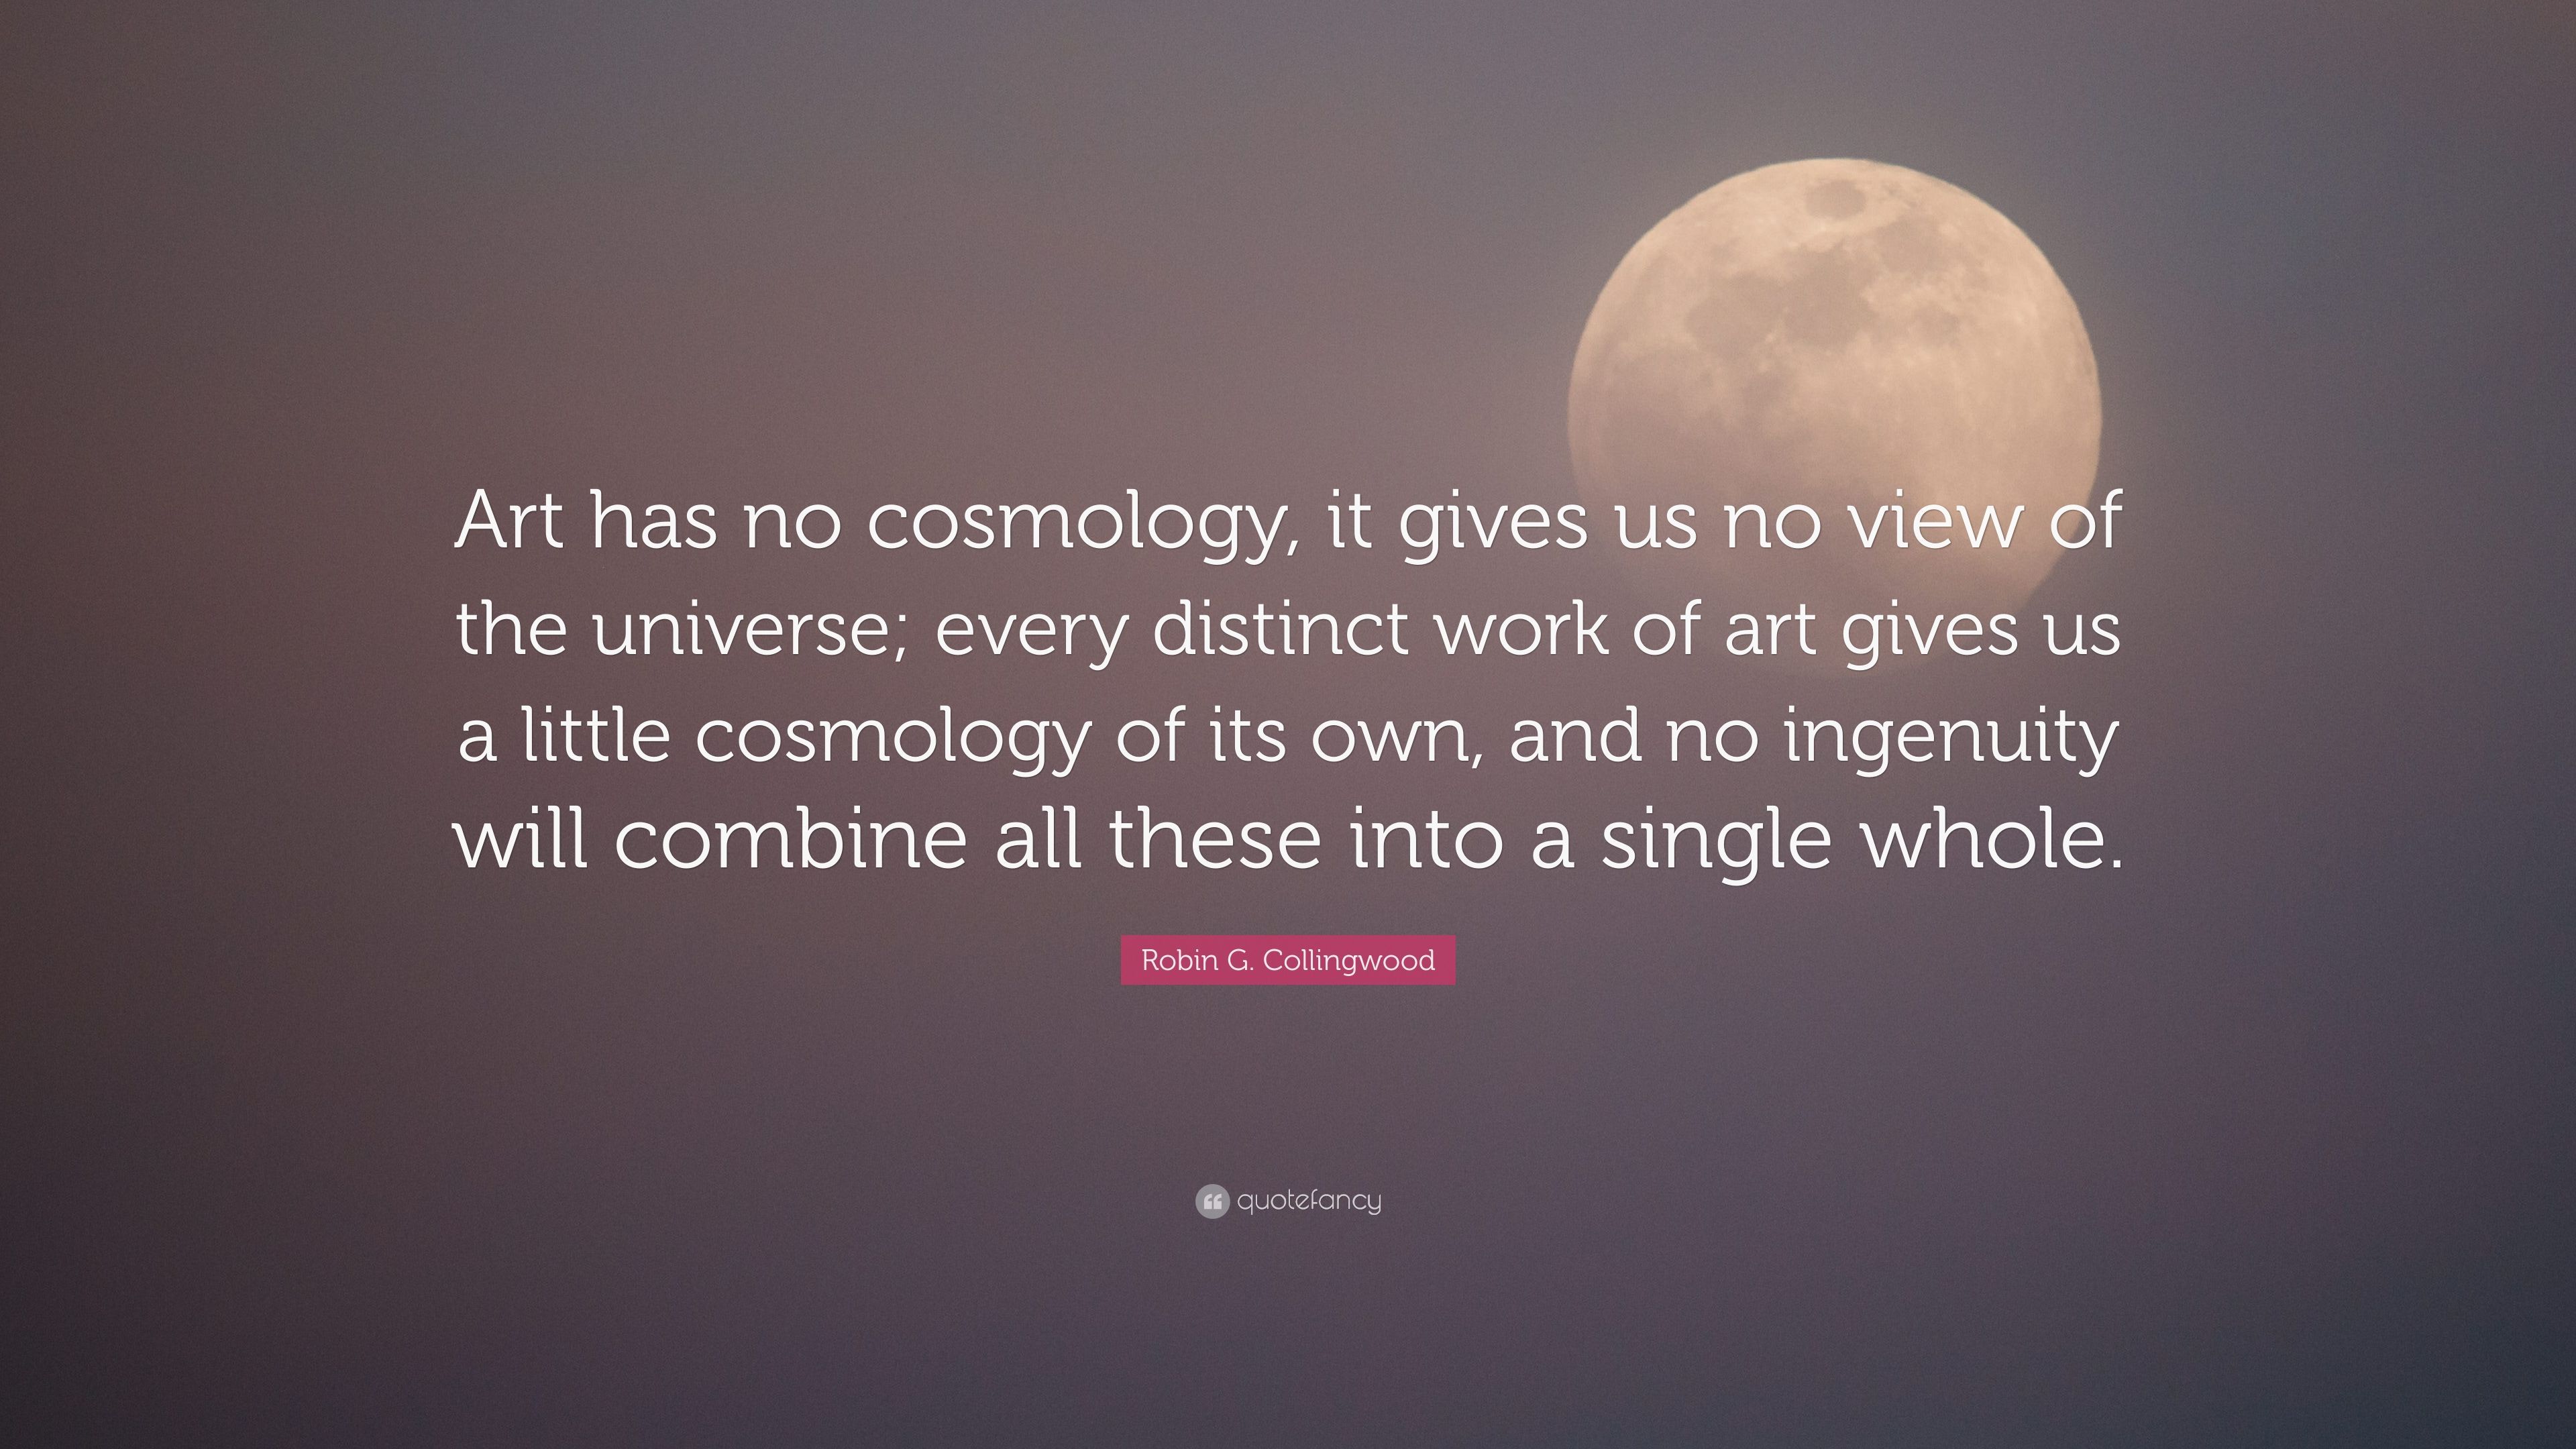 Robin G. Collingwood Quote: “Art has no cosmology, it gives us no view of the universe; every distinct work of art gives us a little cosmology of its.” (7 wallpaper)